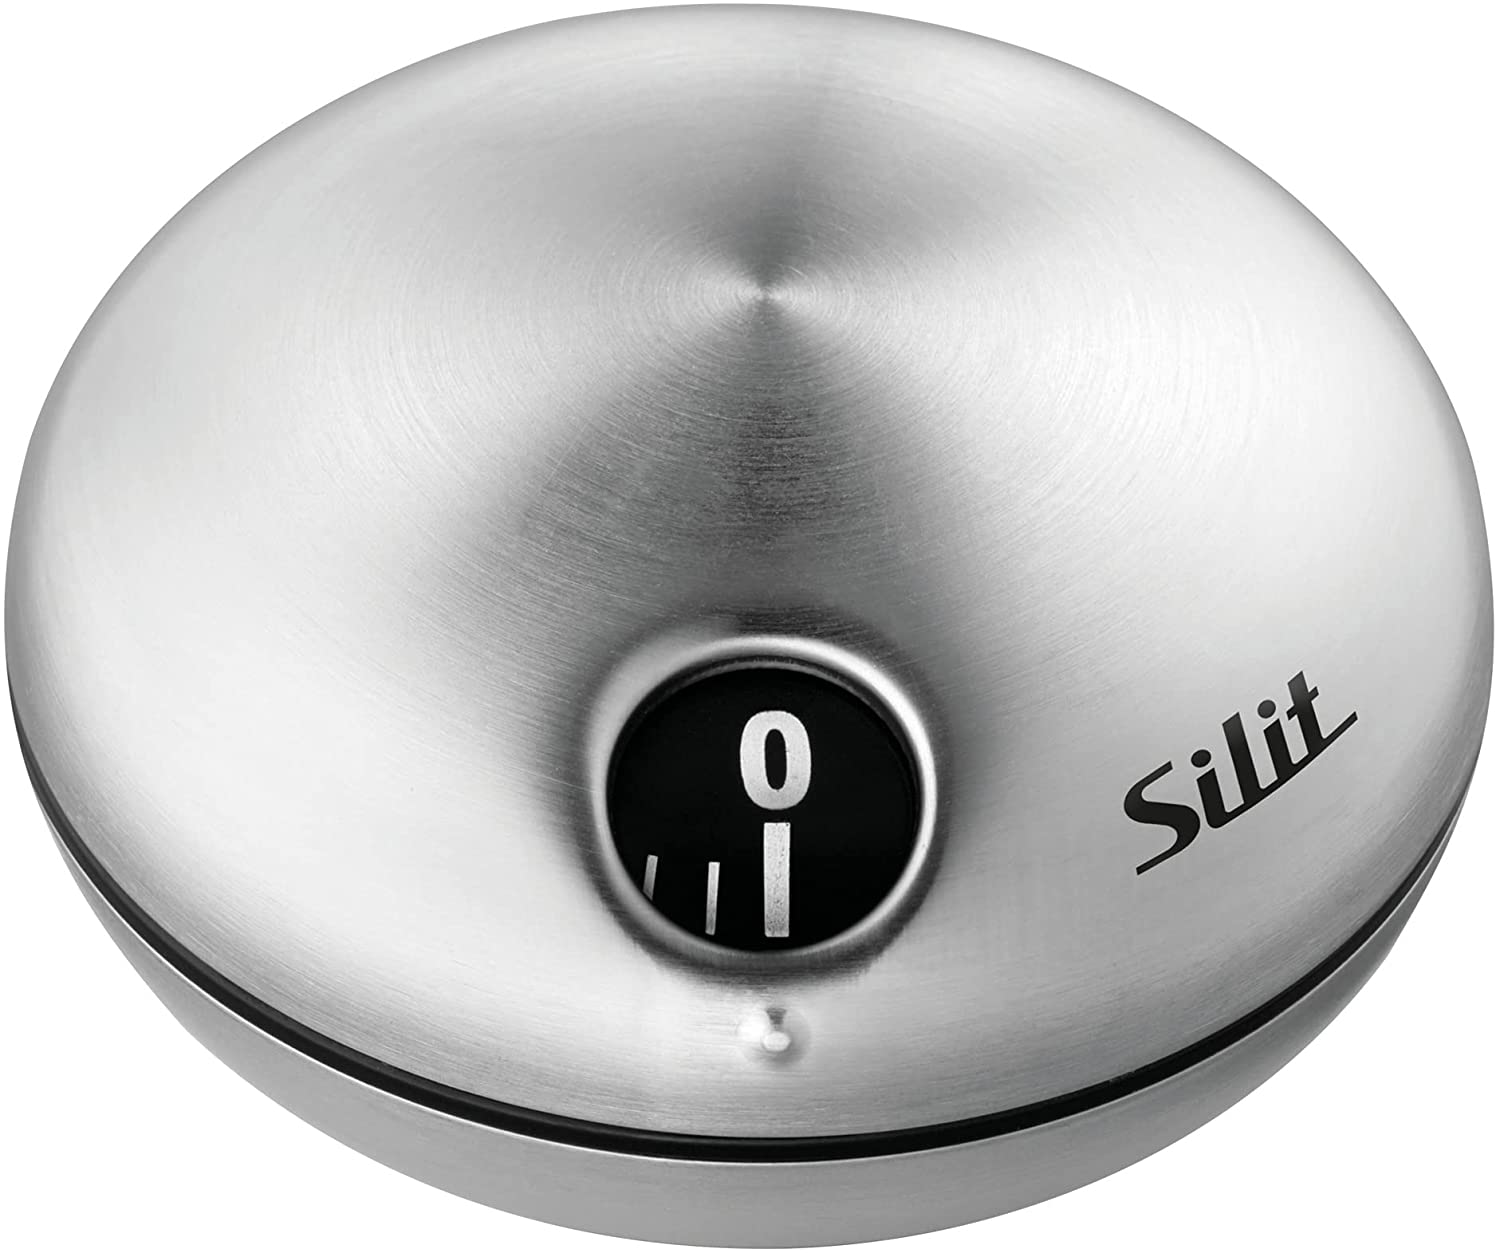 Silit Puk Magnetic Egg Timer Kitchen Timer Stainless Steel 60 Minutes Setting Time